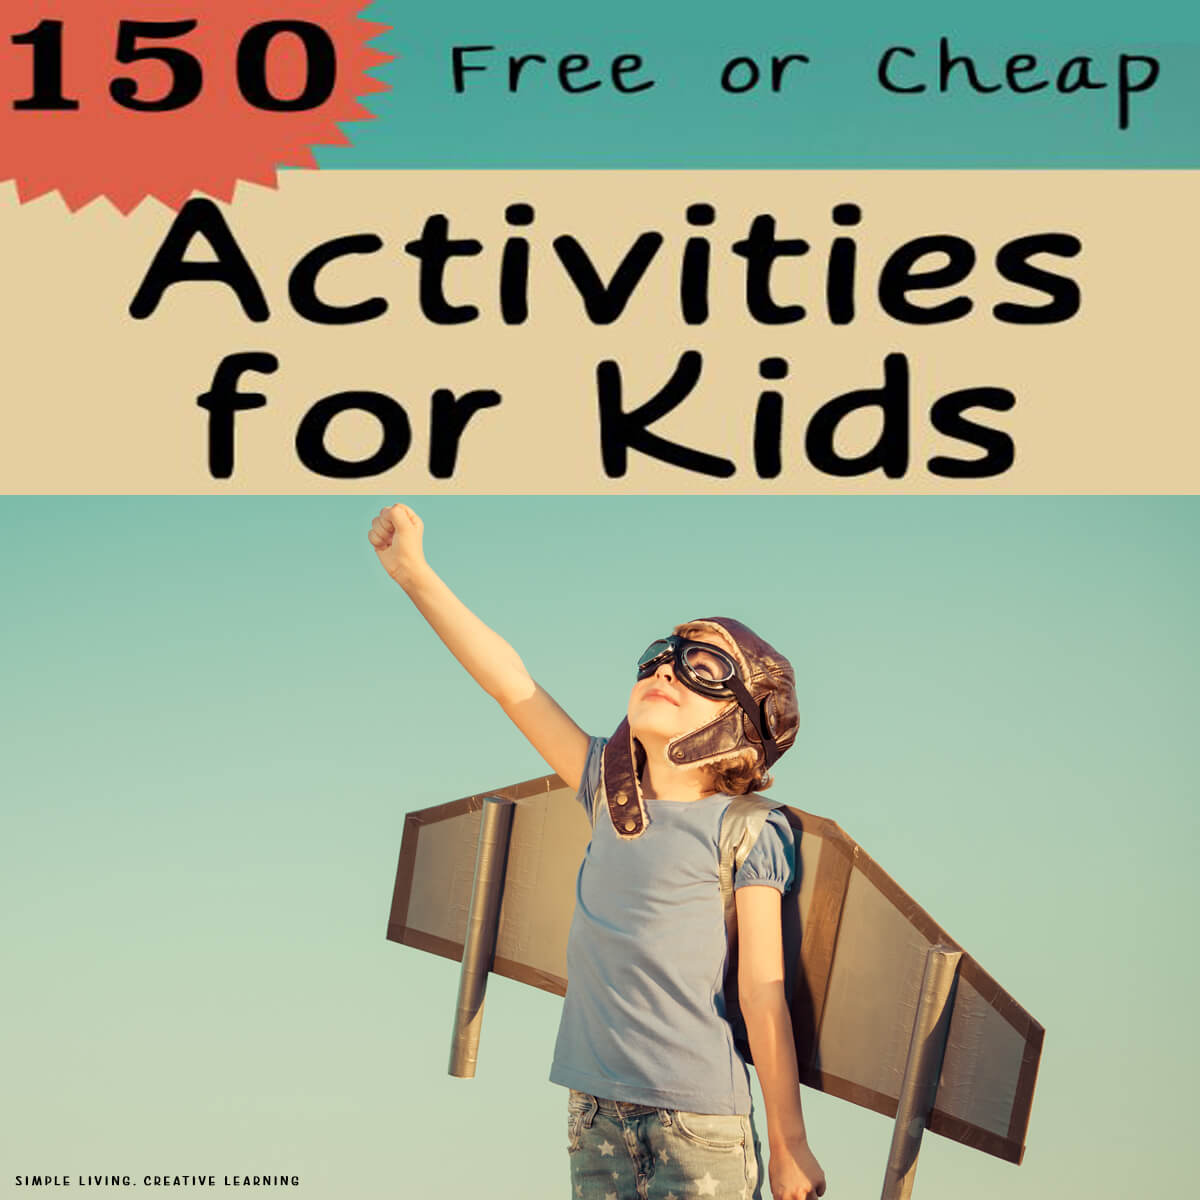 150 Free (or Cheap) Activities for Kids - kid pretending to fly